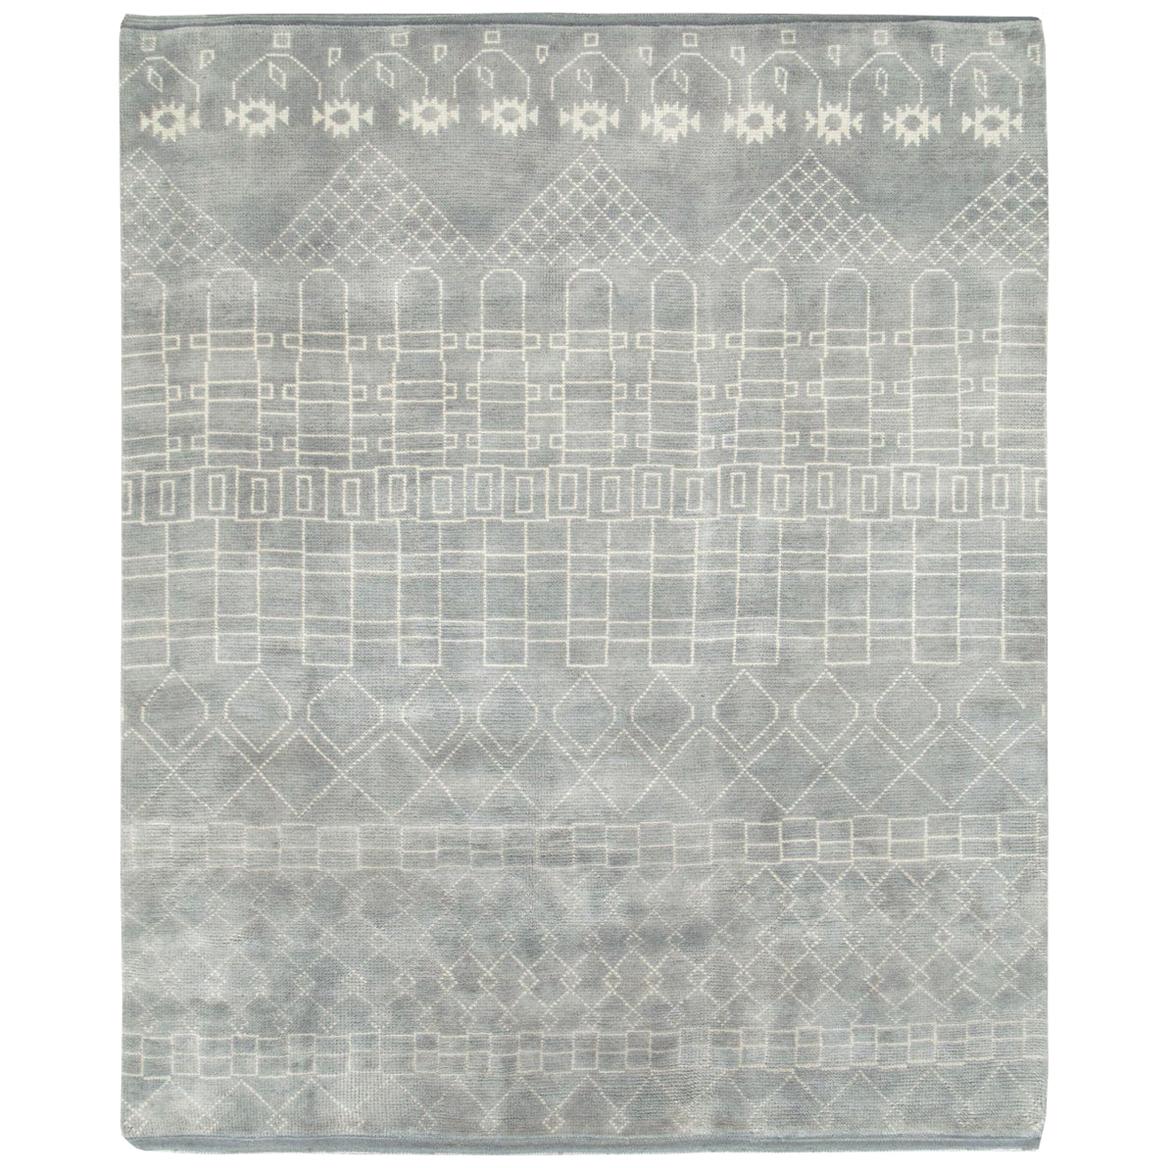 Contemporary Handmade Moroccan Room Size Carpet in Grey and White For Sale